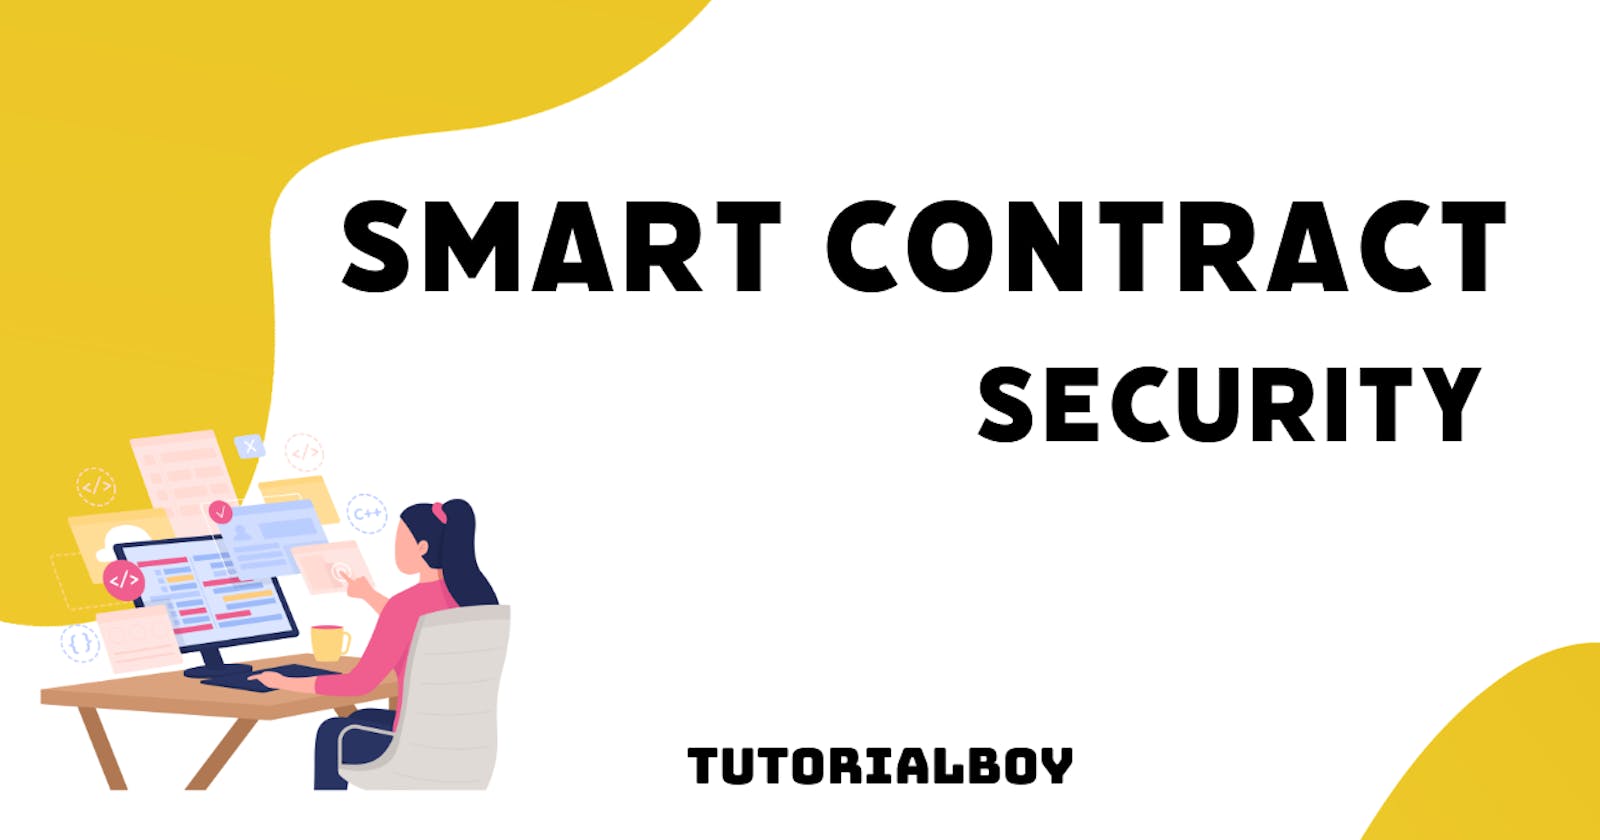 A Comprehensive Guide to Learning Smart Contract Security: From Scratch to Advanced